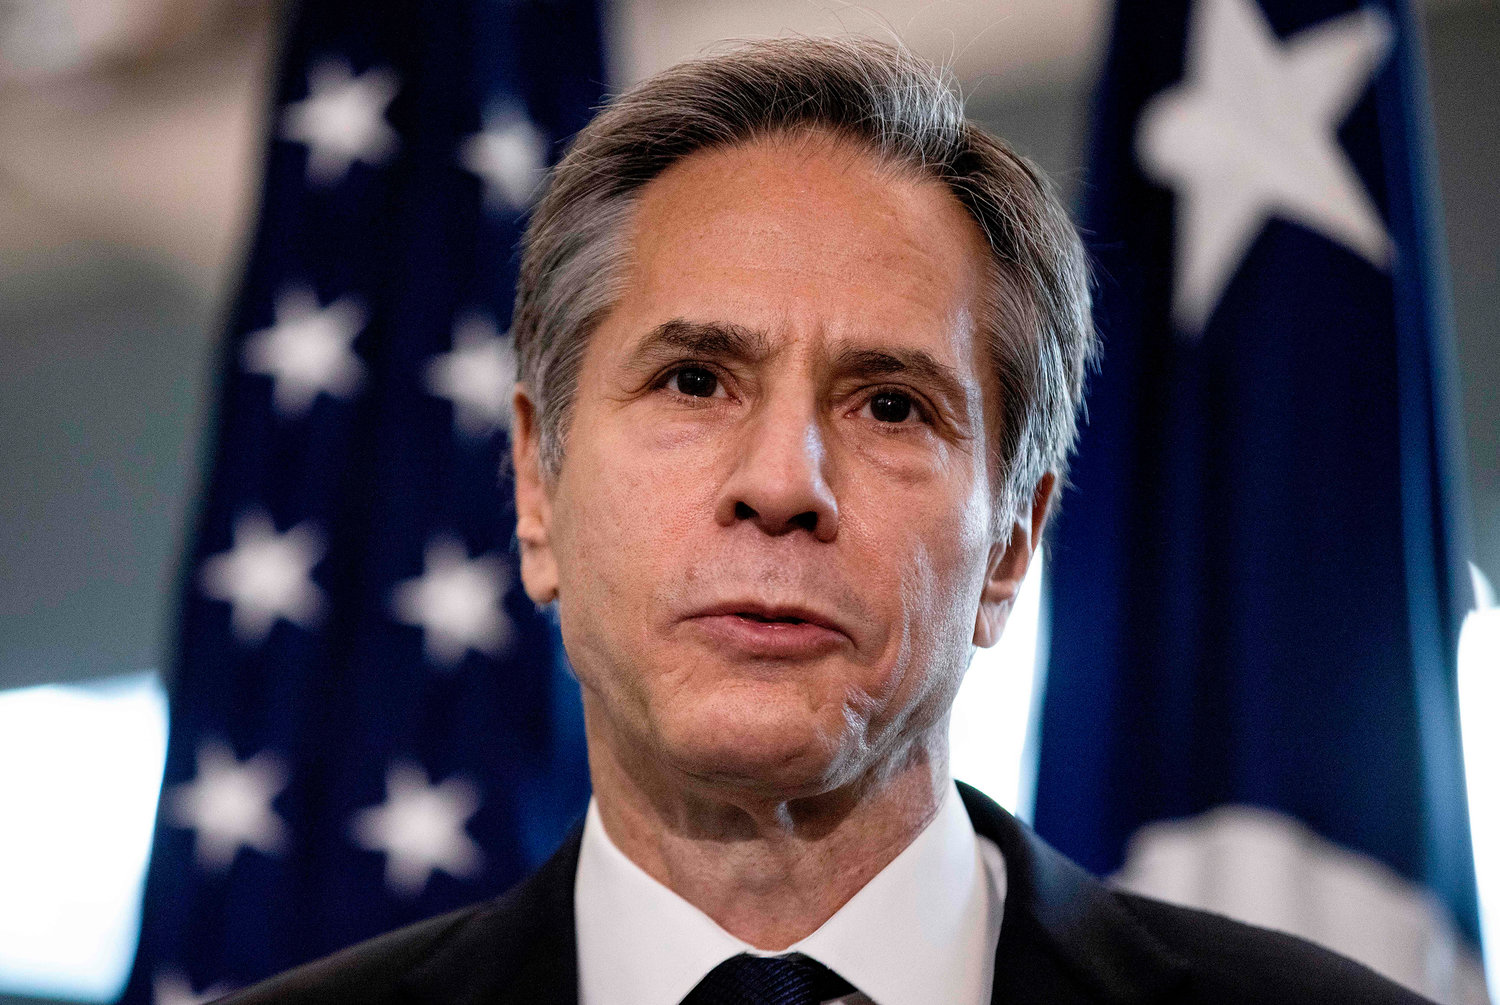 U.S. Secretary of State Antony Blinken on Sunday blamed Iran for a deadly attack on an Israel-linked tanker. (Carlos Barria/Pool/AFP/Getty Images)